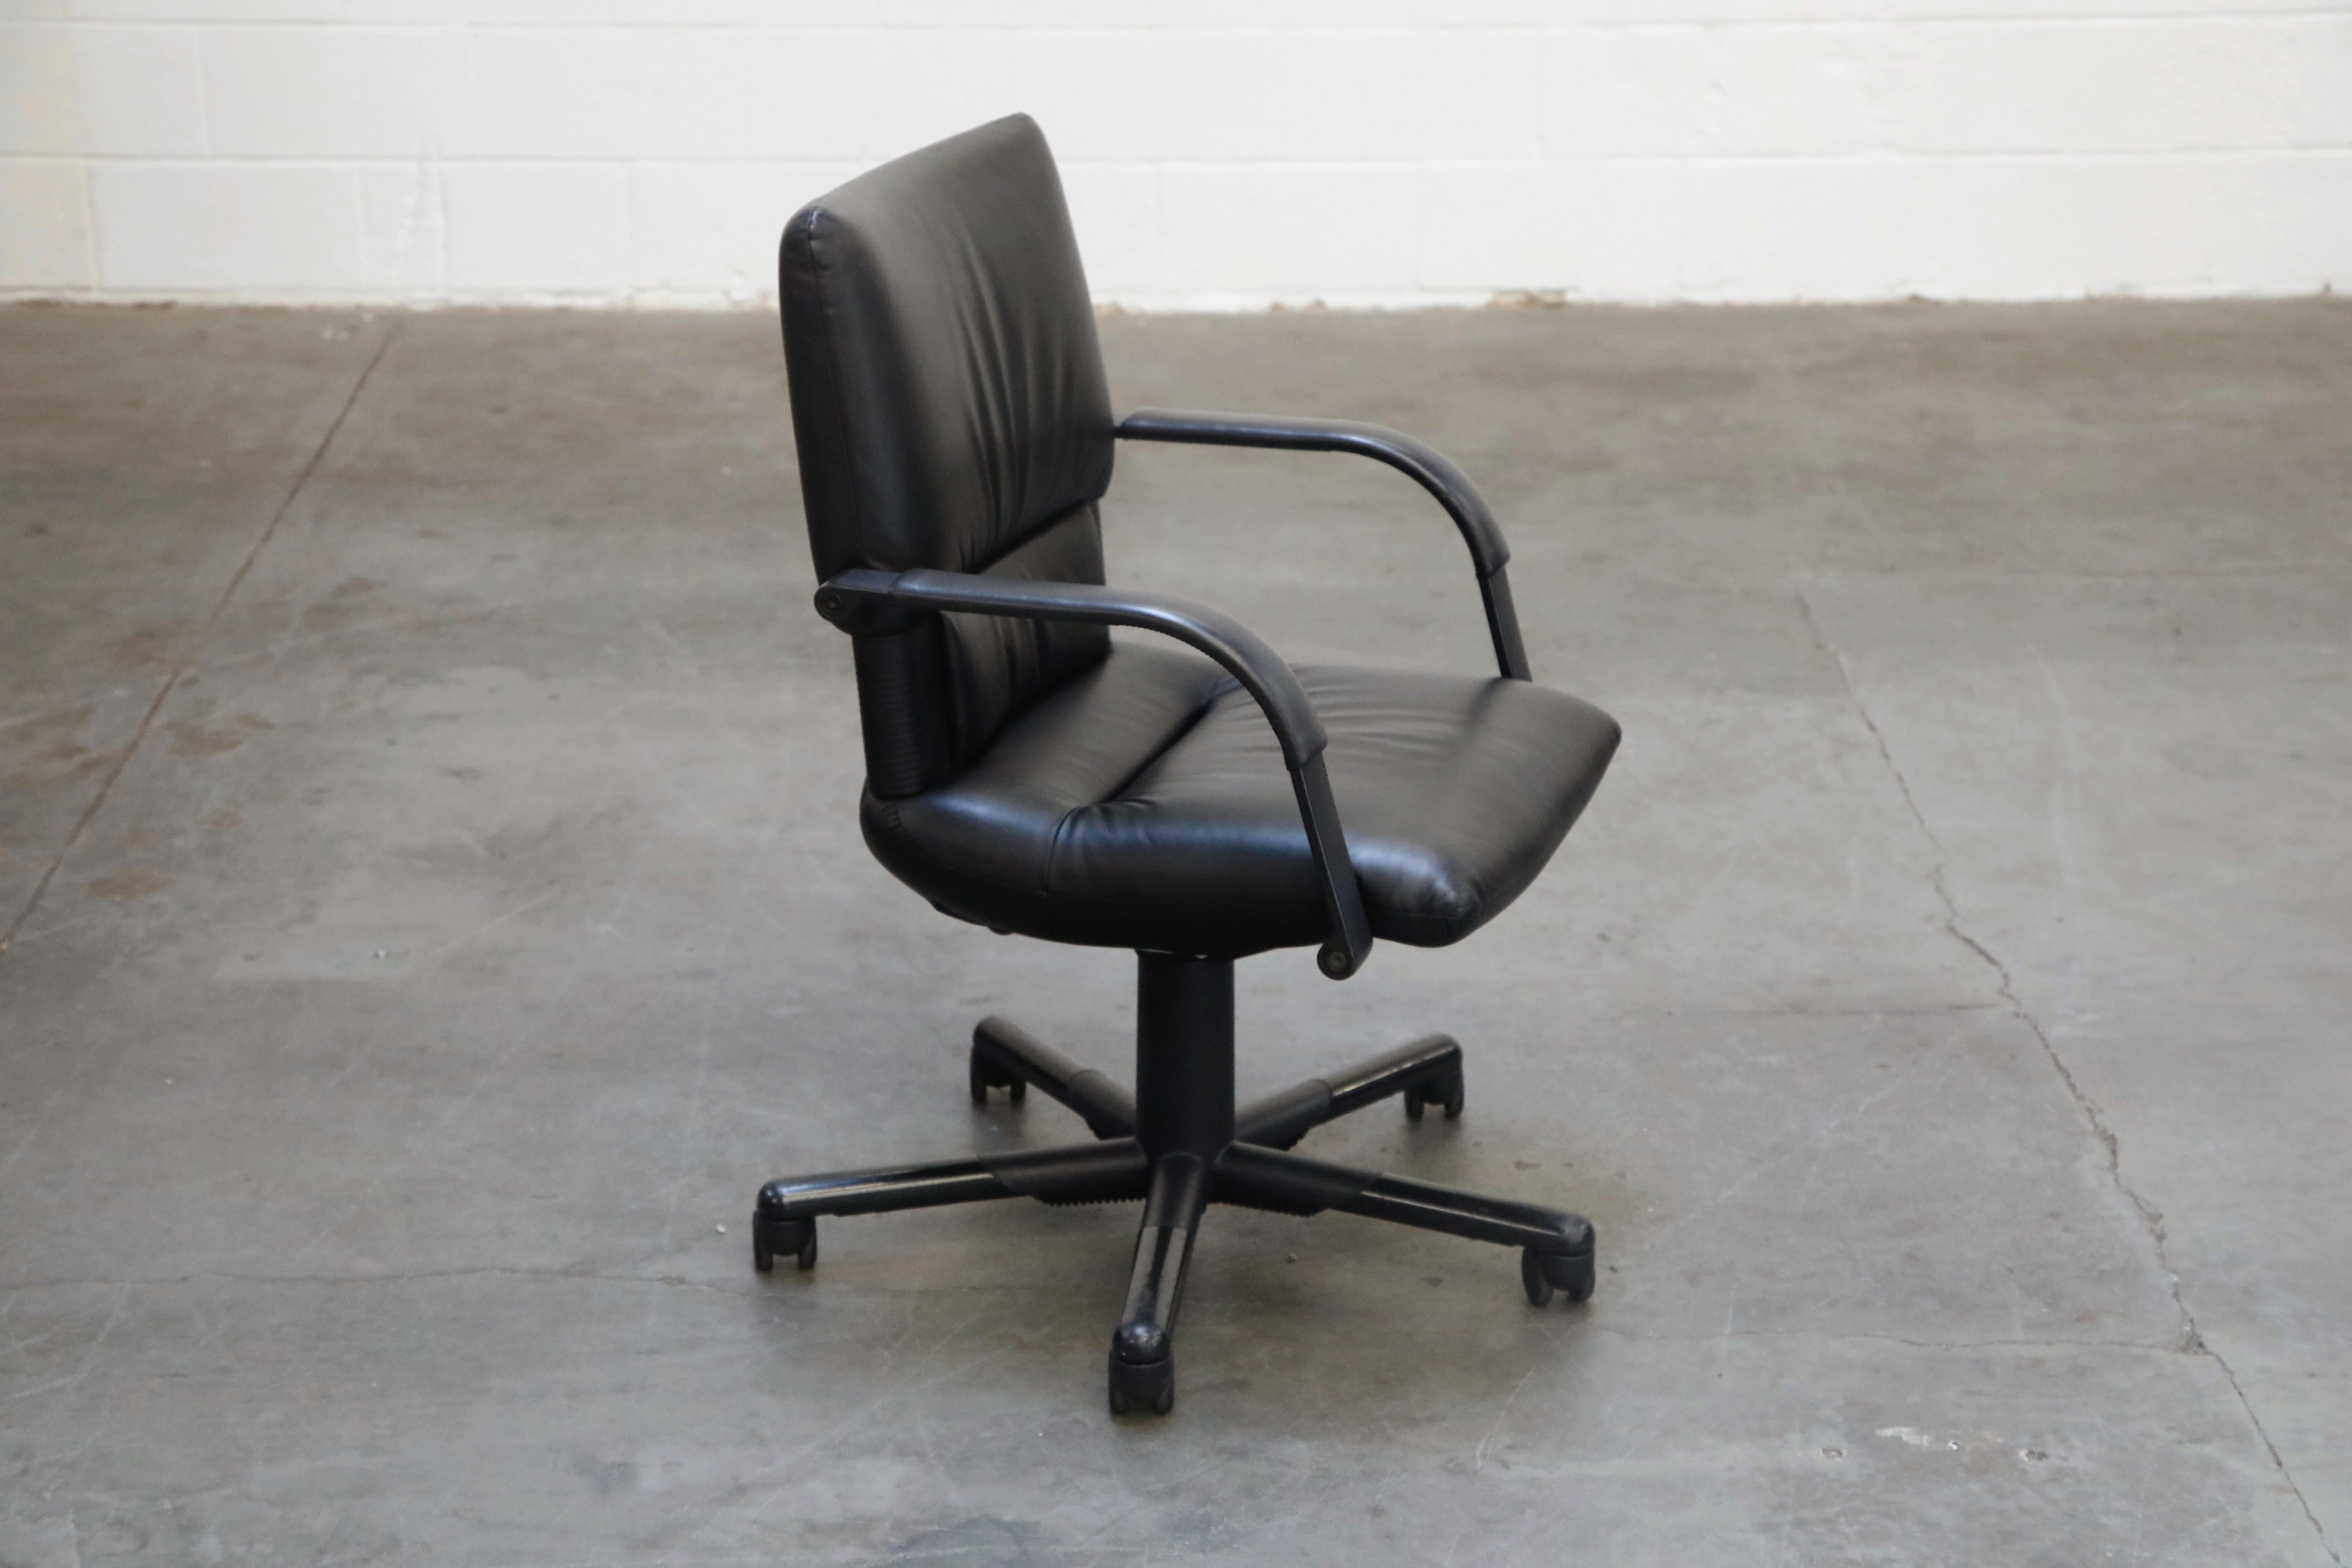 90's office chair